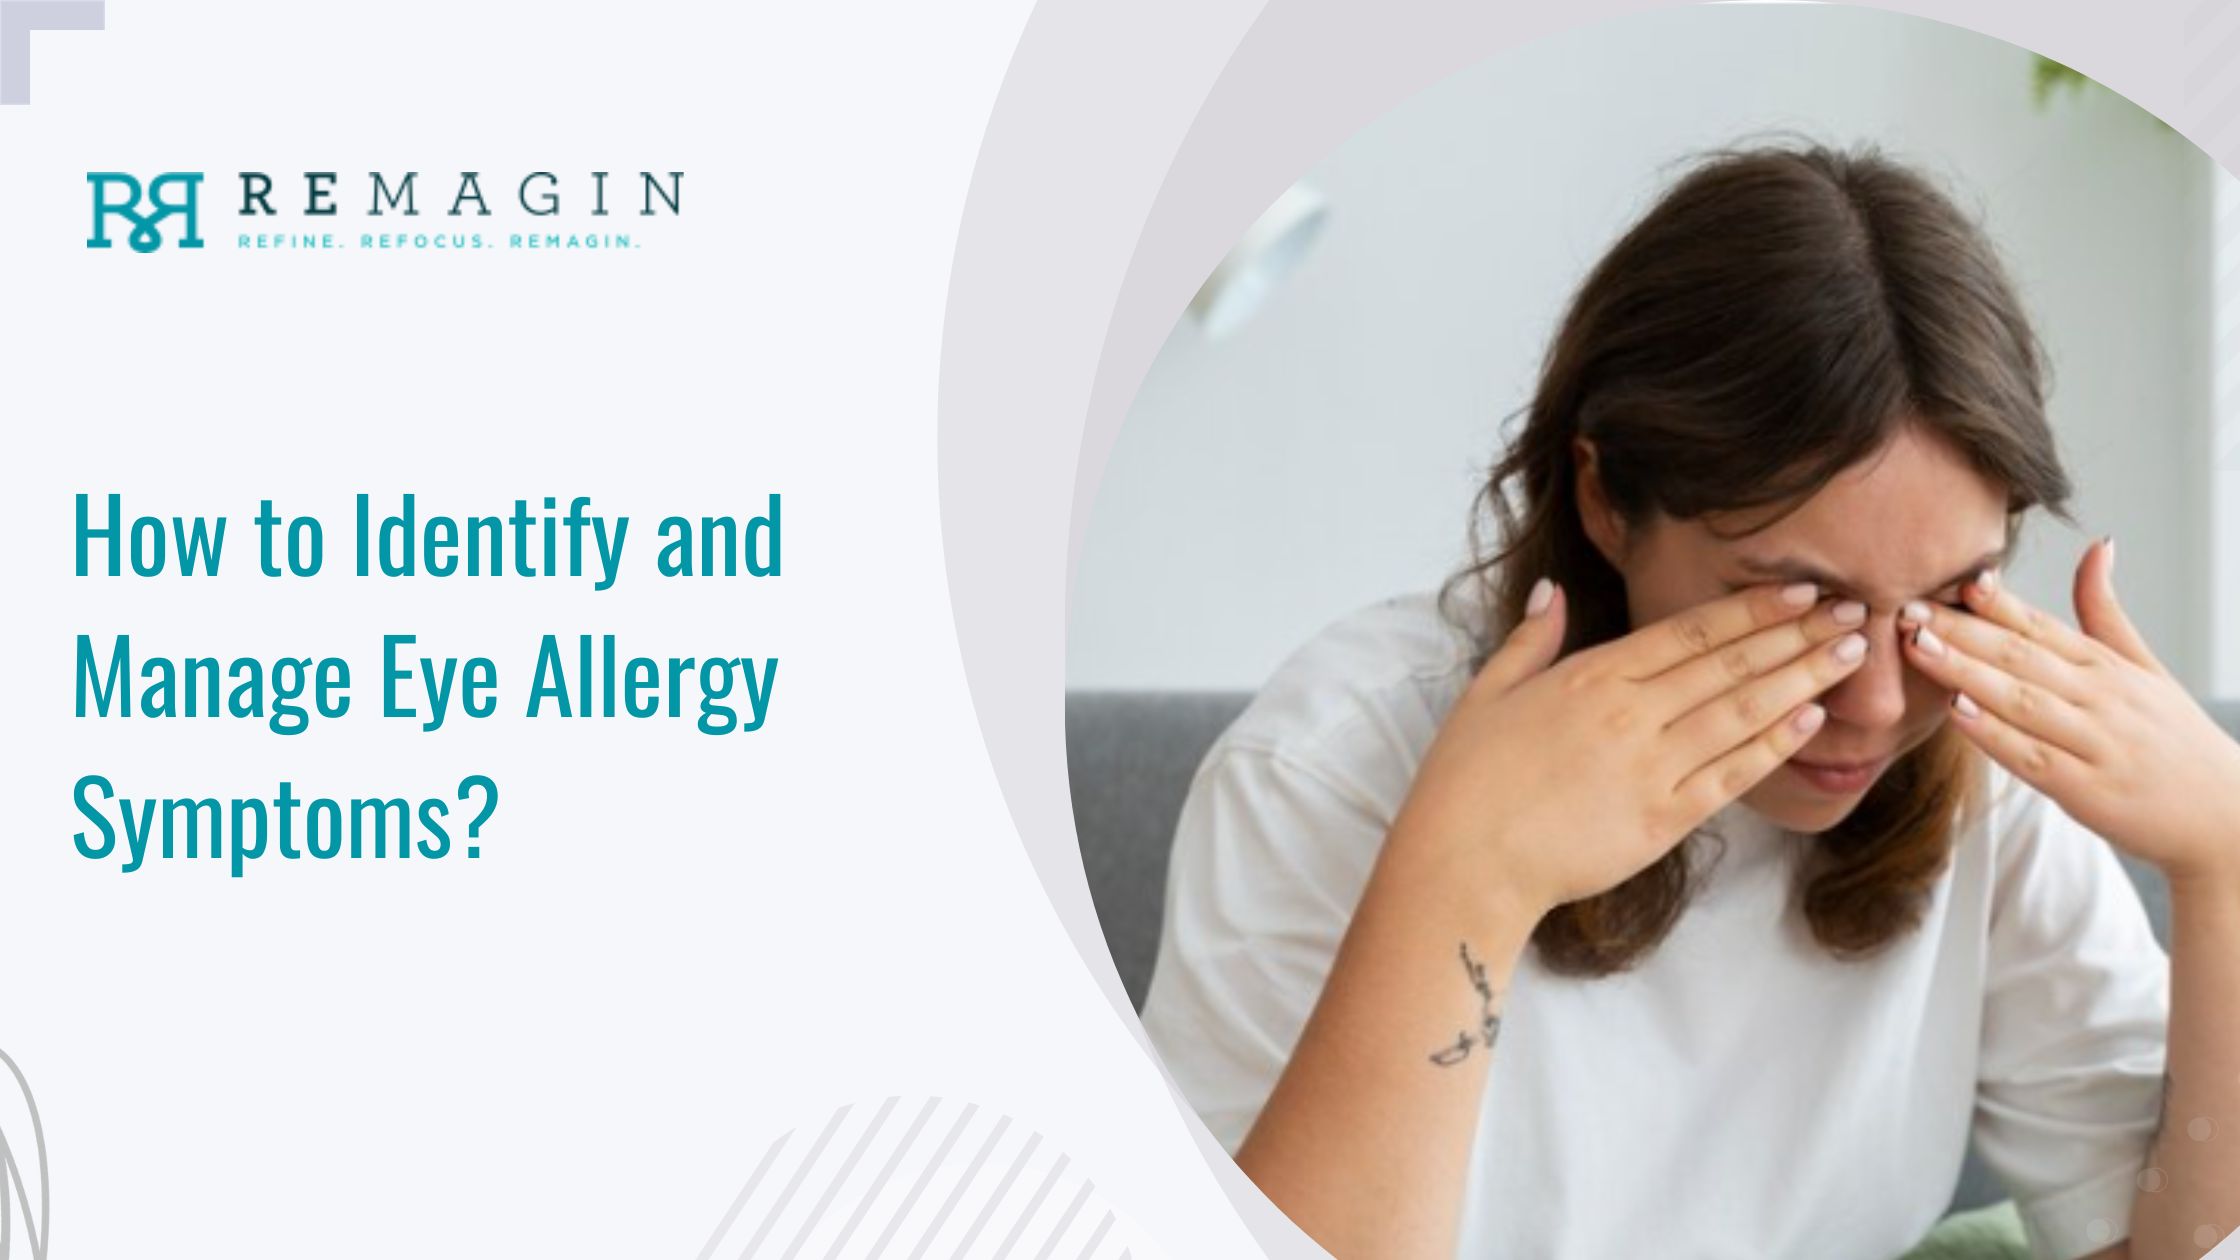 How to Identify and Manage Eye Allergy Symptoms?